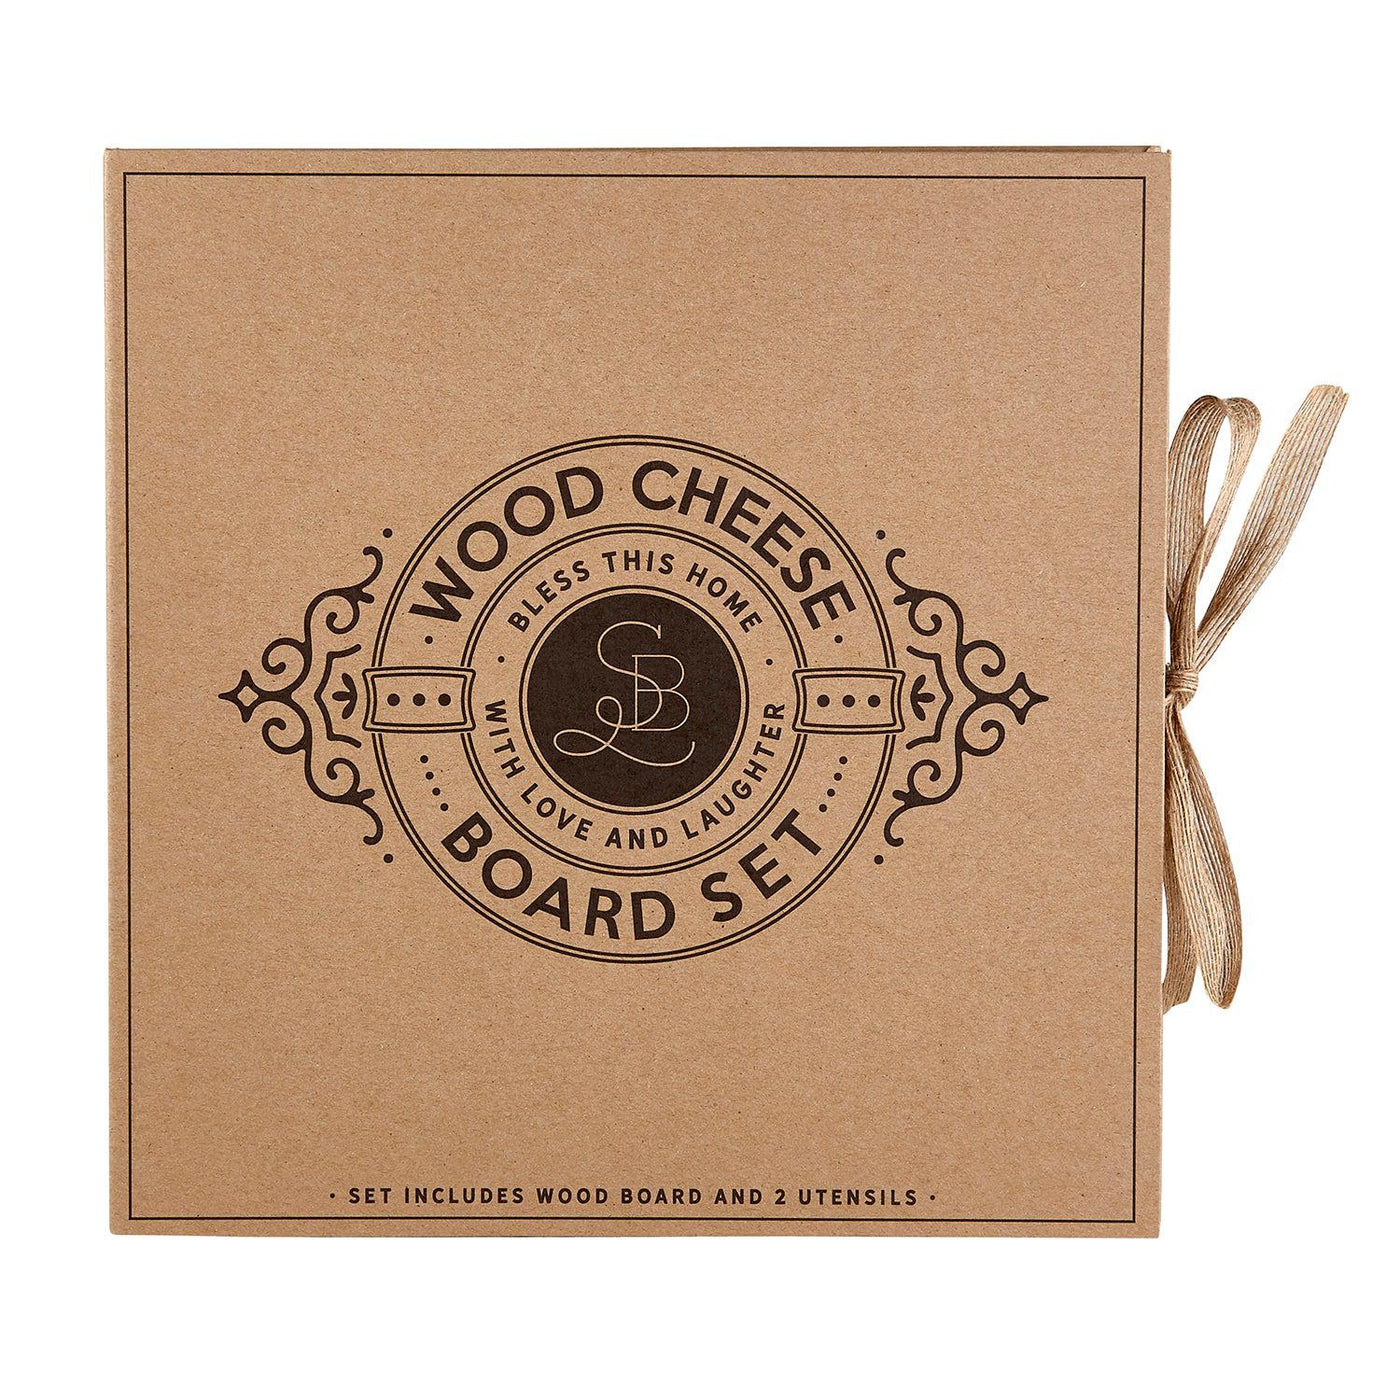  Wooden Cheese Board Godgirl Gifts